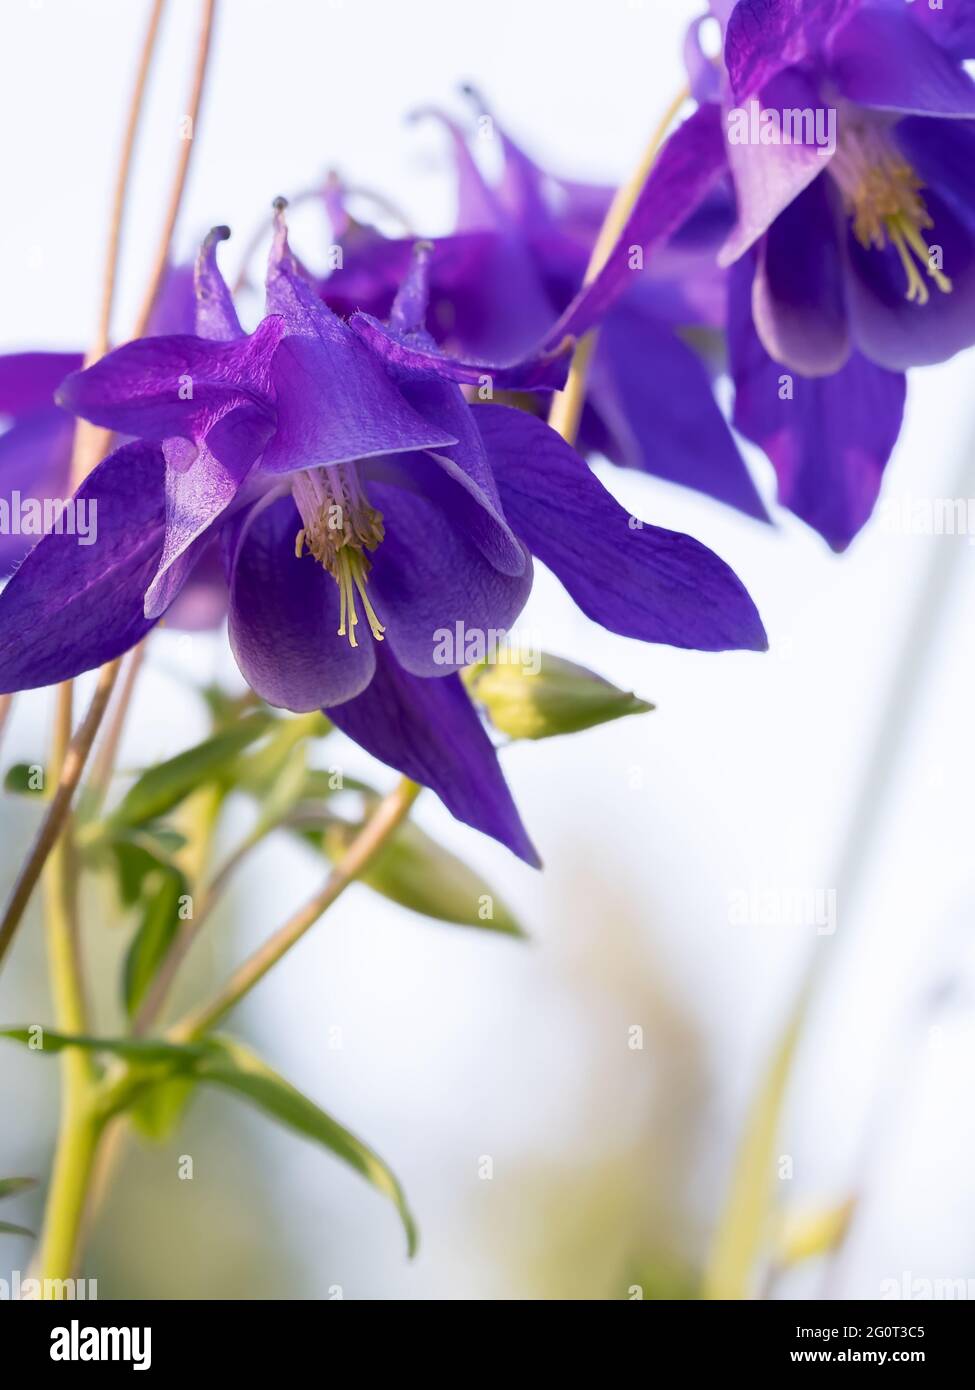 Perennial herb Aquilegia vulgaris with blue flowers on a light blurred background. Stock Photo